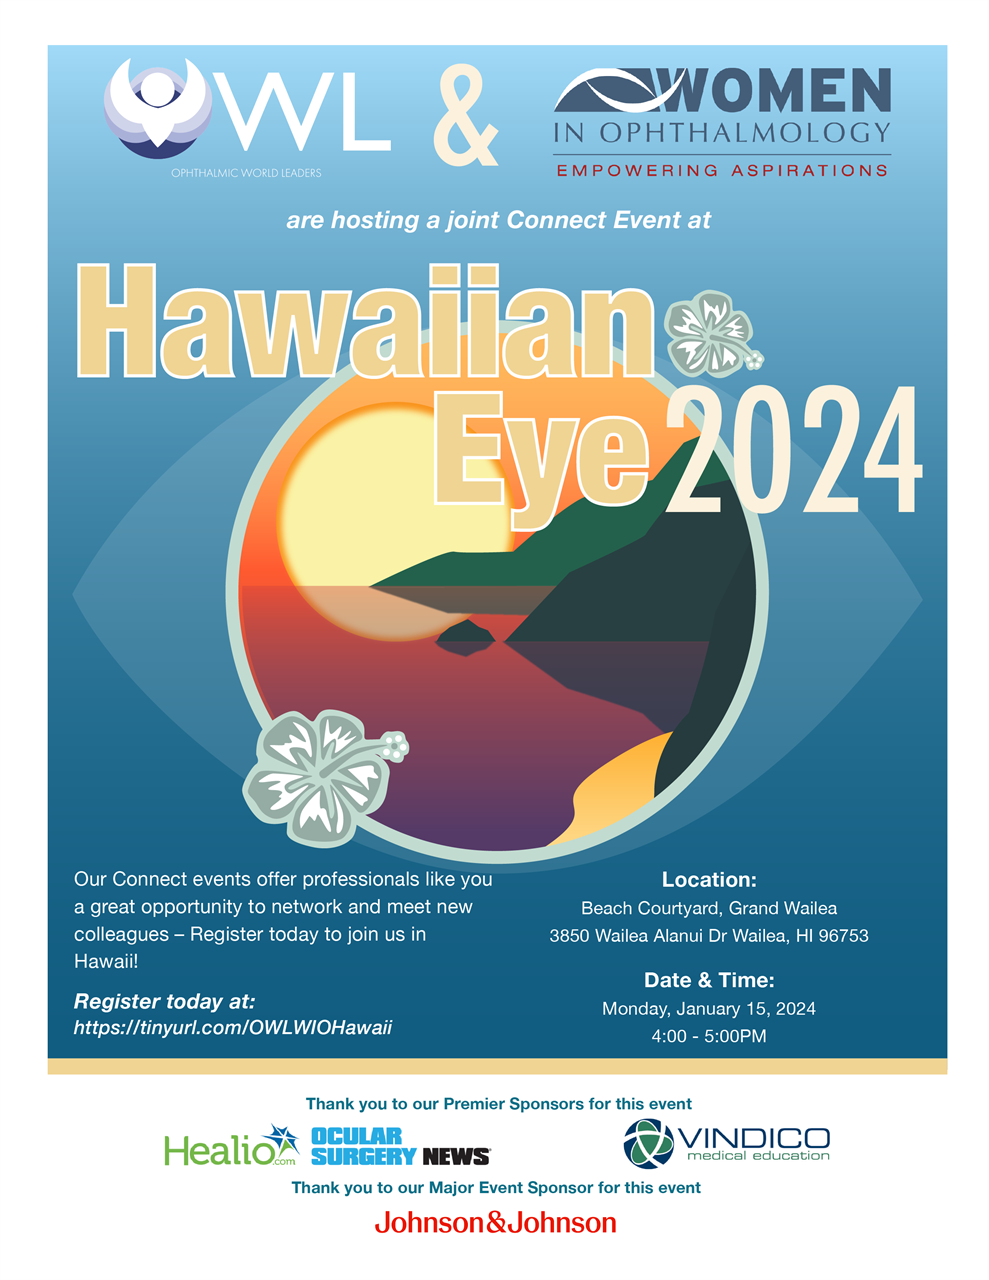 OWL & WIO are hosting a joint Connect Event at Hawaiian Eye on January 15, 2024; 4 PM. Location: Beach Courtyard - Grand Wailea; 3850 Wailea Alanui Dr, Wailea, HI 96753 | Thank you to our Premier Sponsors: Healio & Vindico; and our Major Event Sponsor: Johnson & Johnson Vision. Our Connect events offer professionals like you a great opportunity to network and meet new colleagues. Register today!